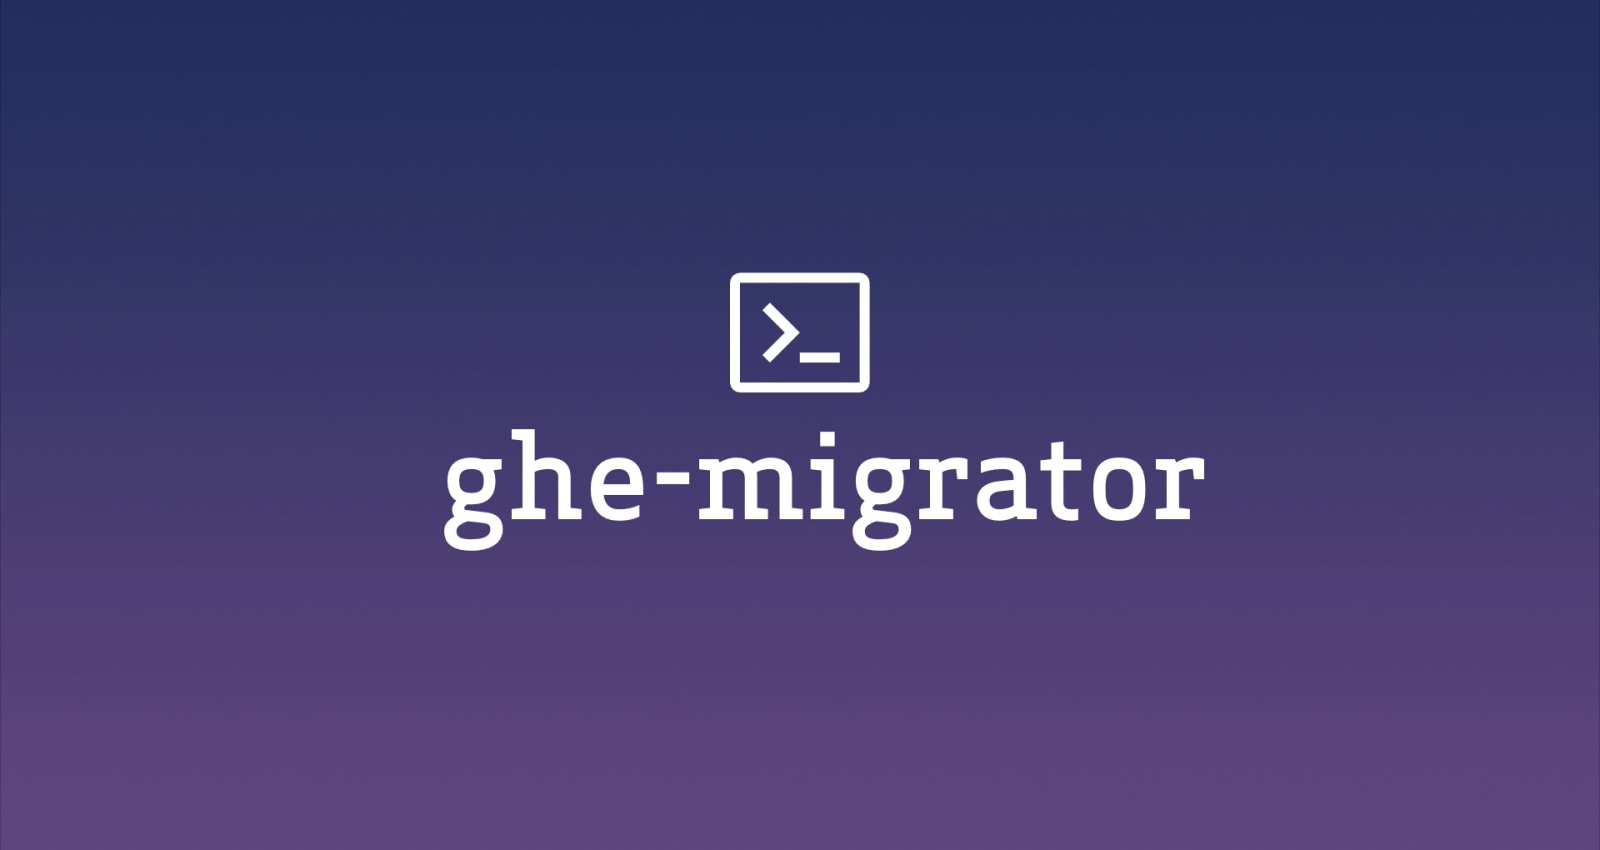 Migrate your repositories using ghe-migrator